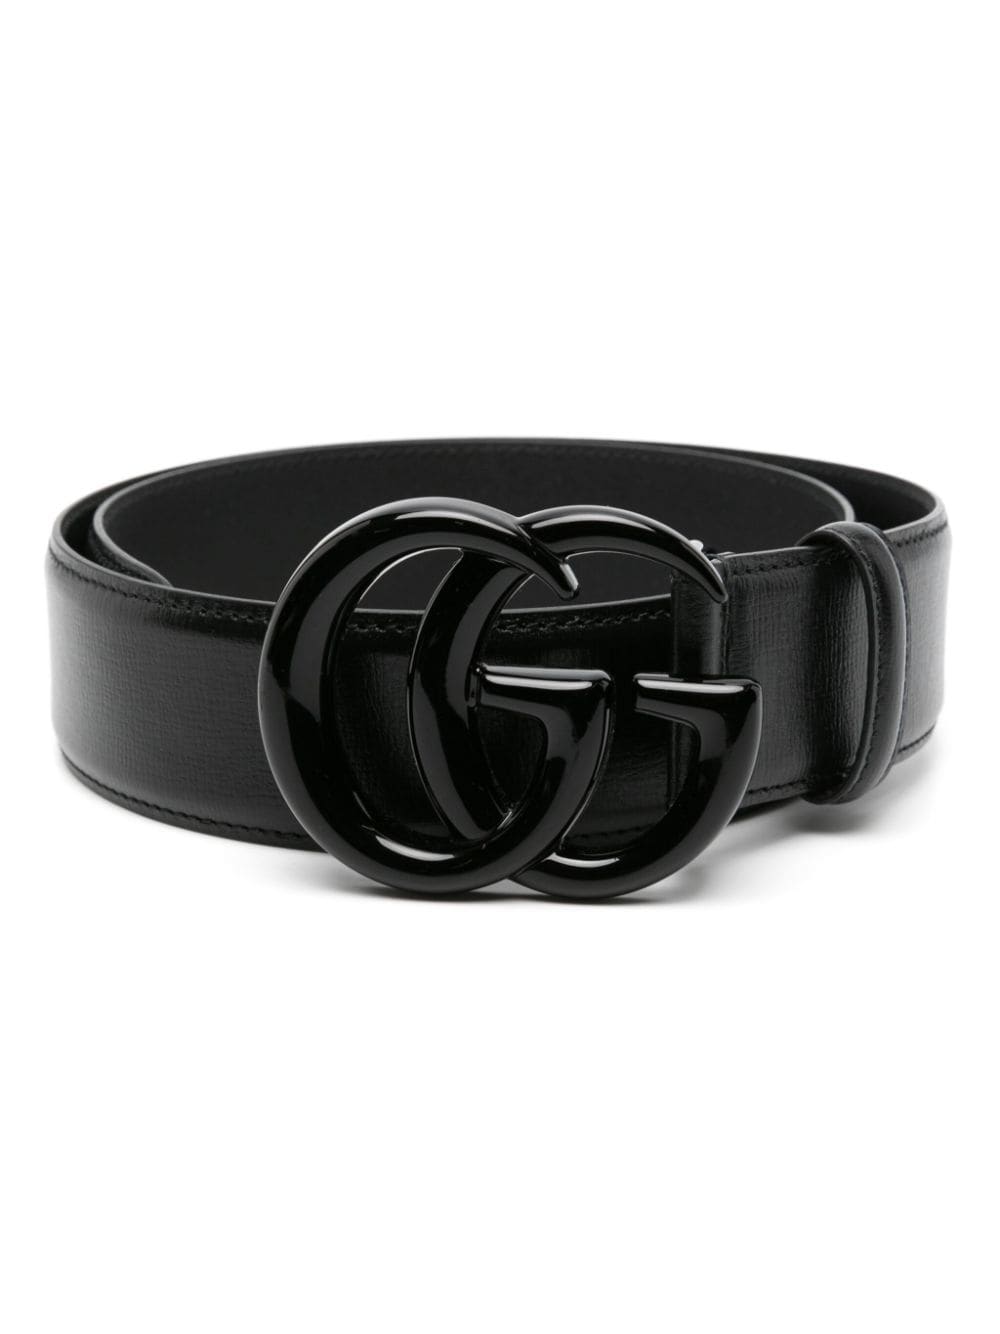 Image 1 of Gucci GG Marmont leather belt